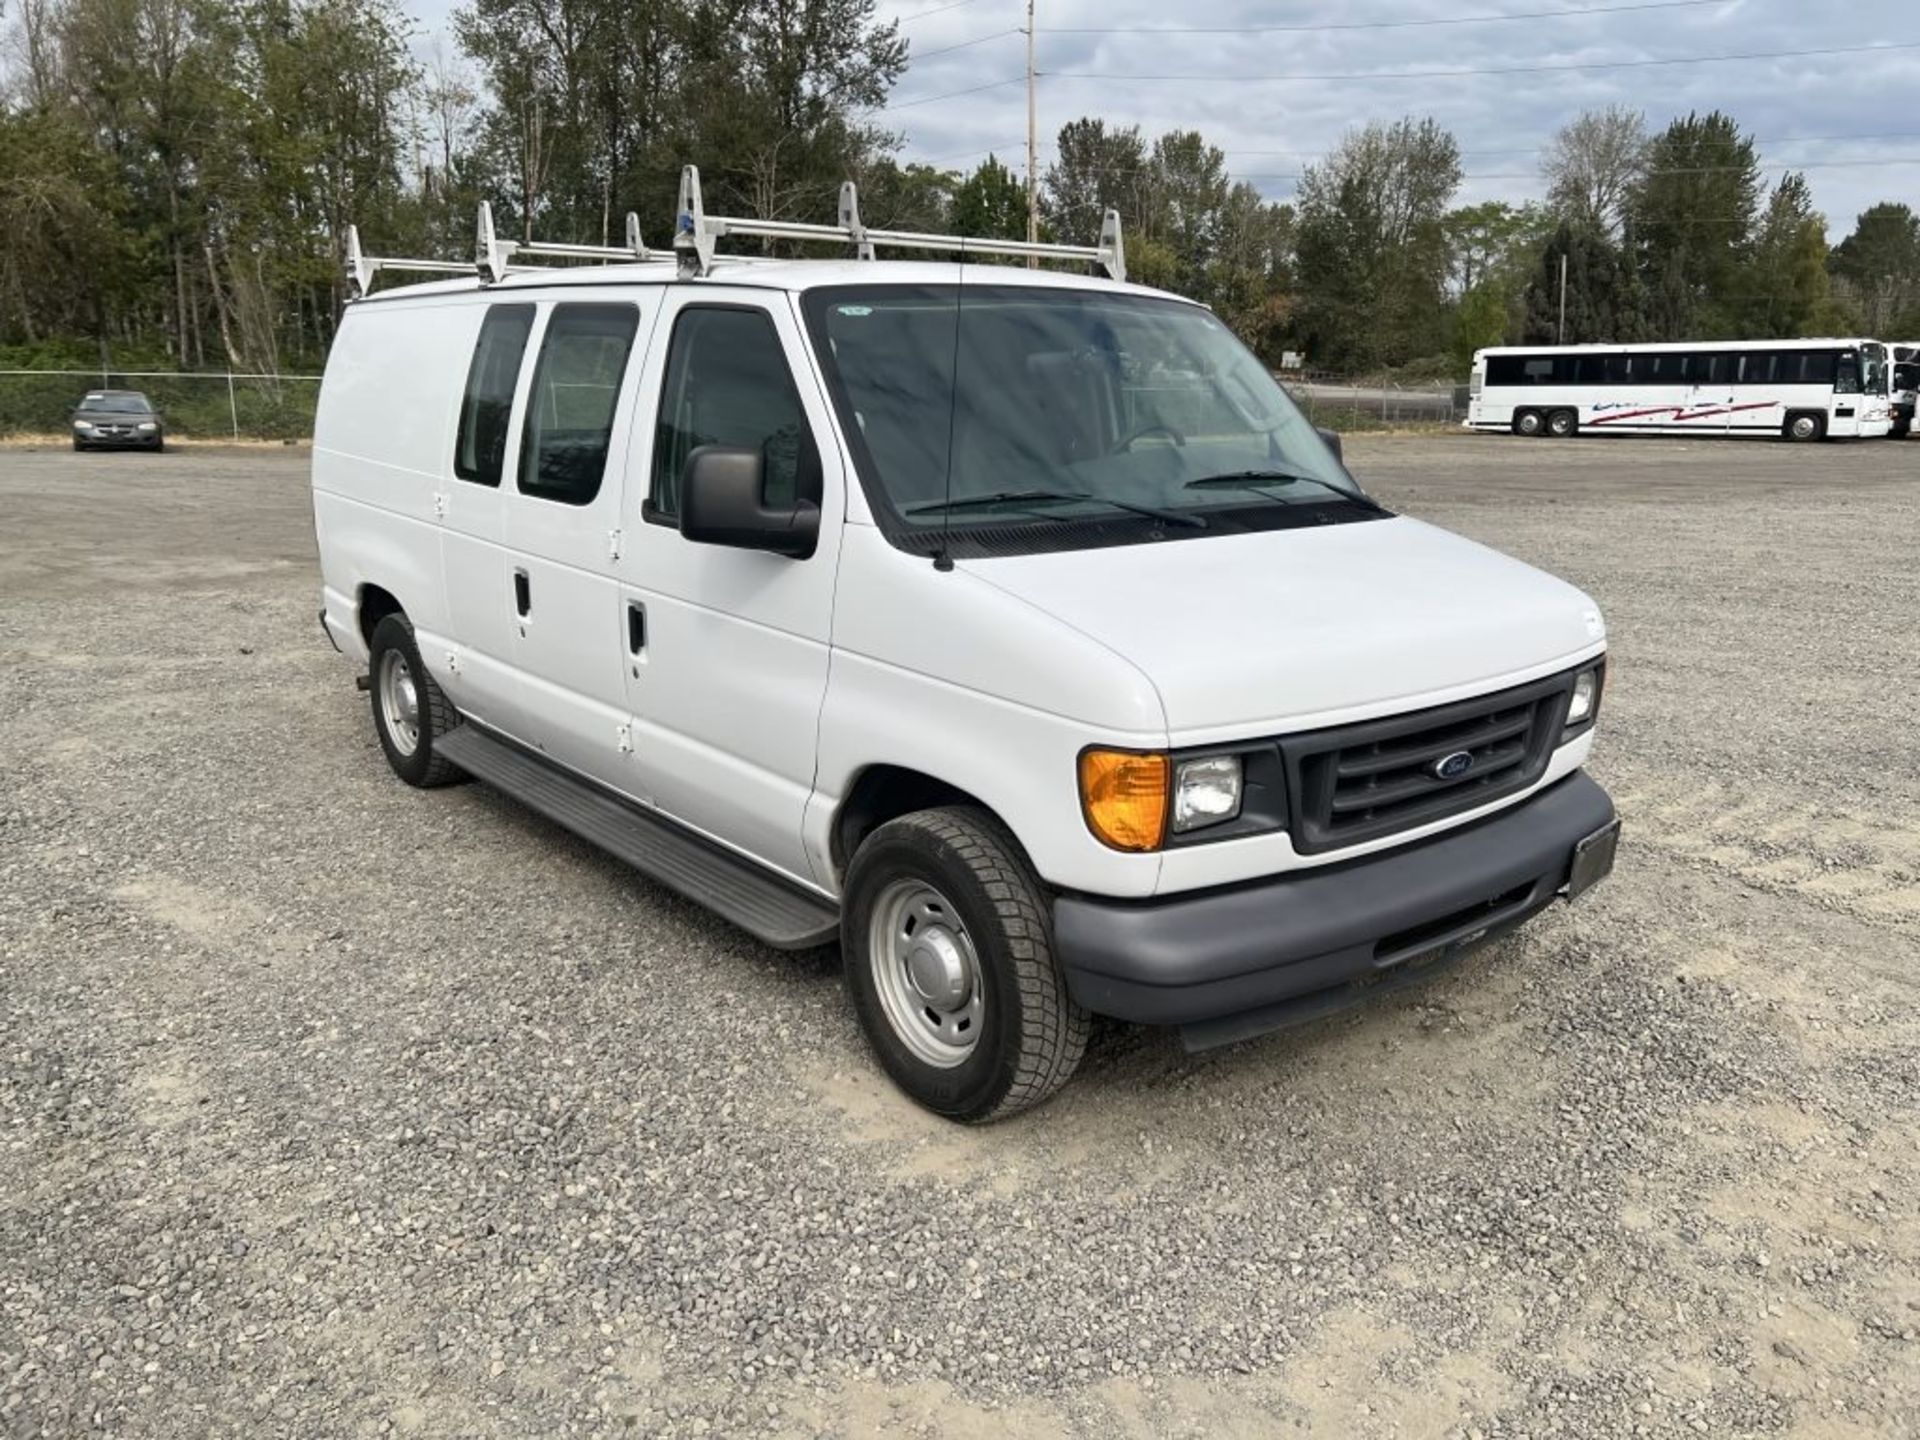 2006 Ford E150 Cargo Van - Image 2 of 21